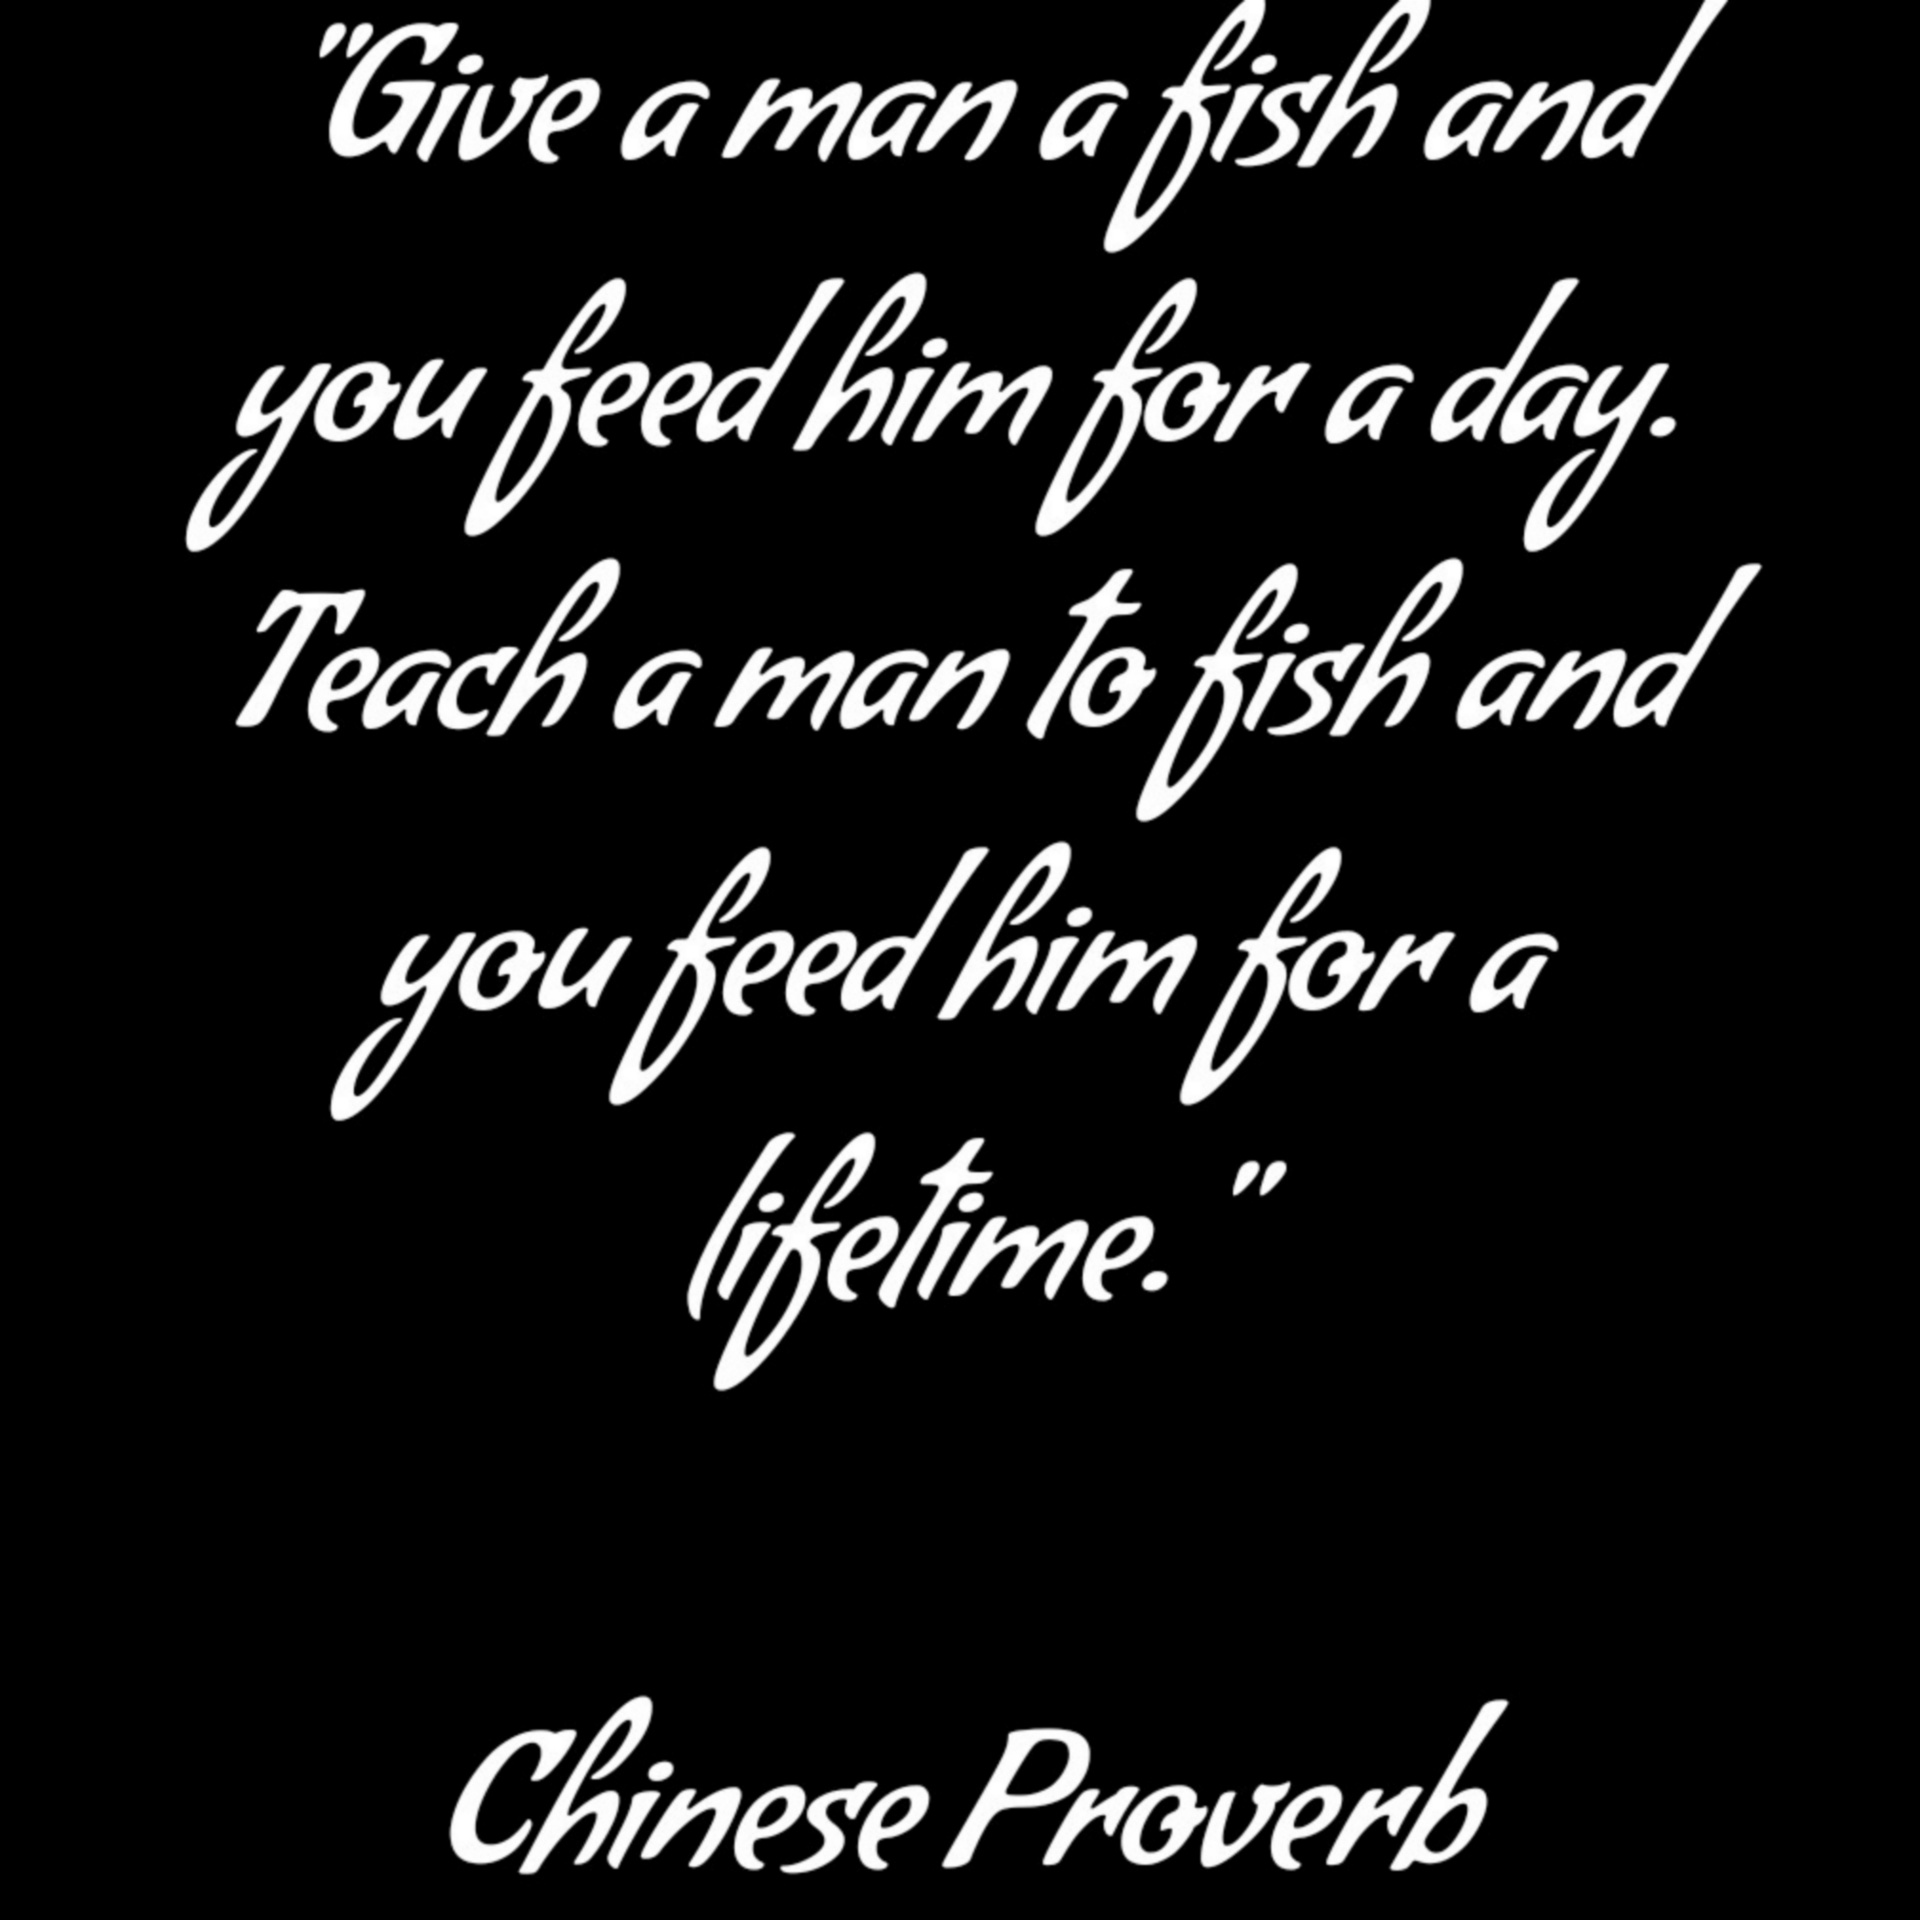 Give a man a fish and you feed him for a day. Teach a man to fish and you feed him for a lifetime. - Chinese Proverb